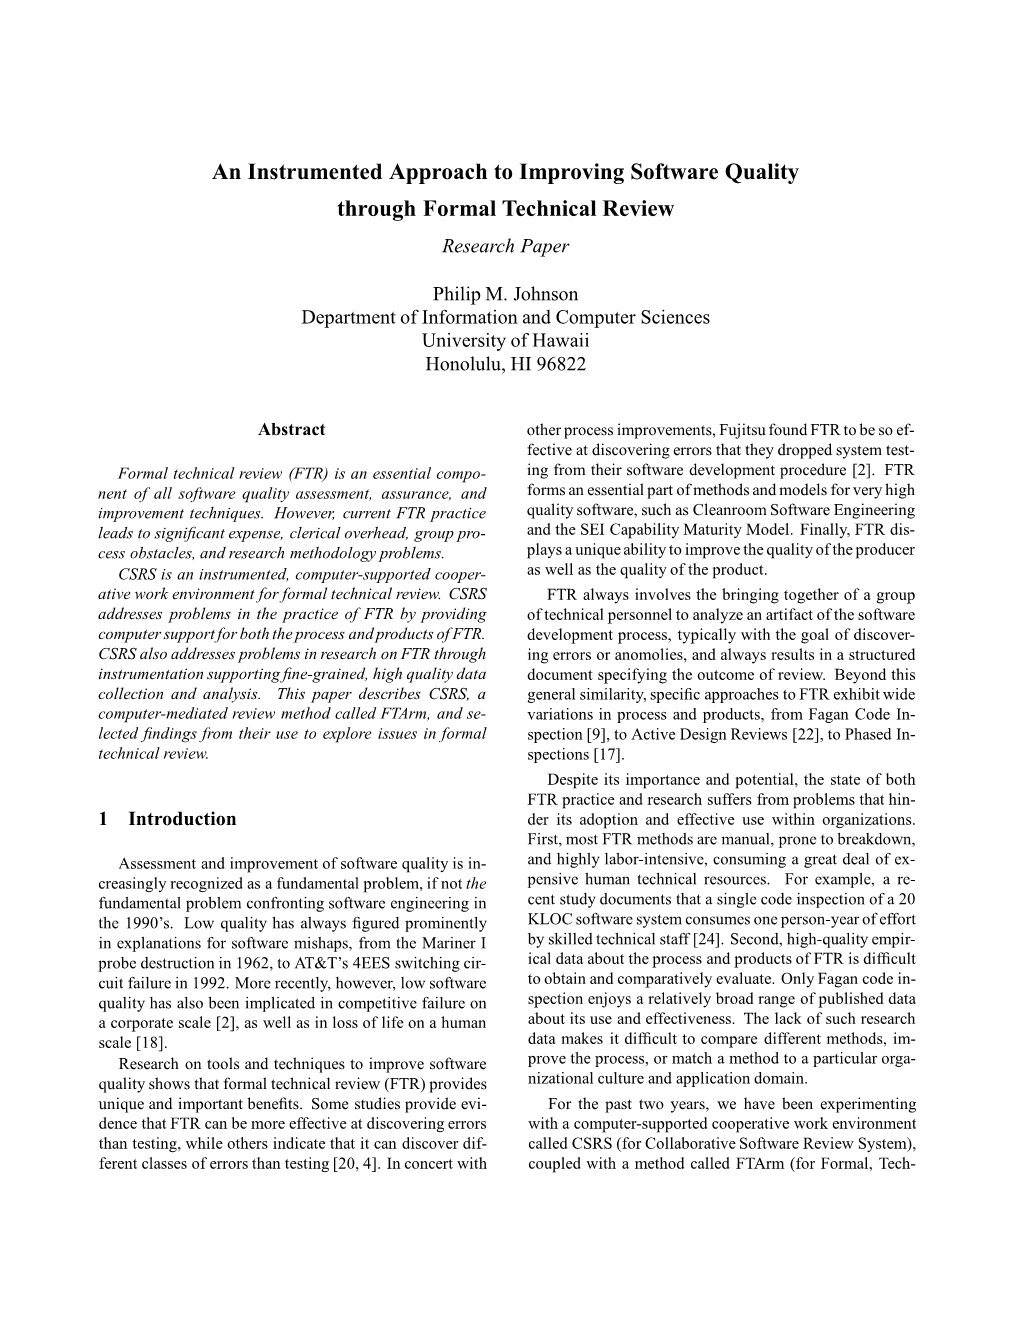 An Instrumented Approach to Improving Software Quality Through Formal Technical Review Research Paper